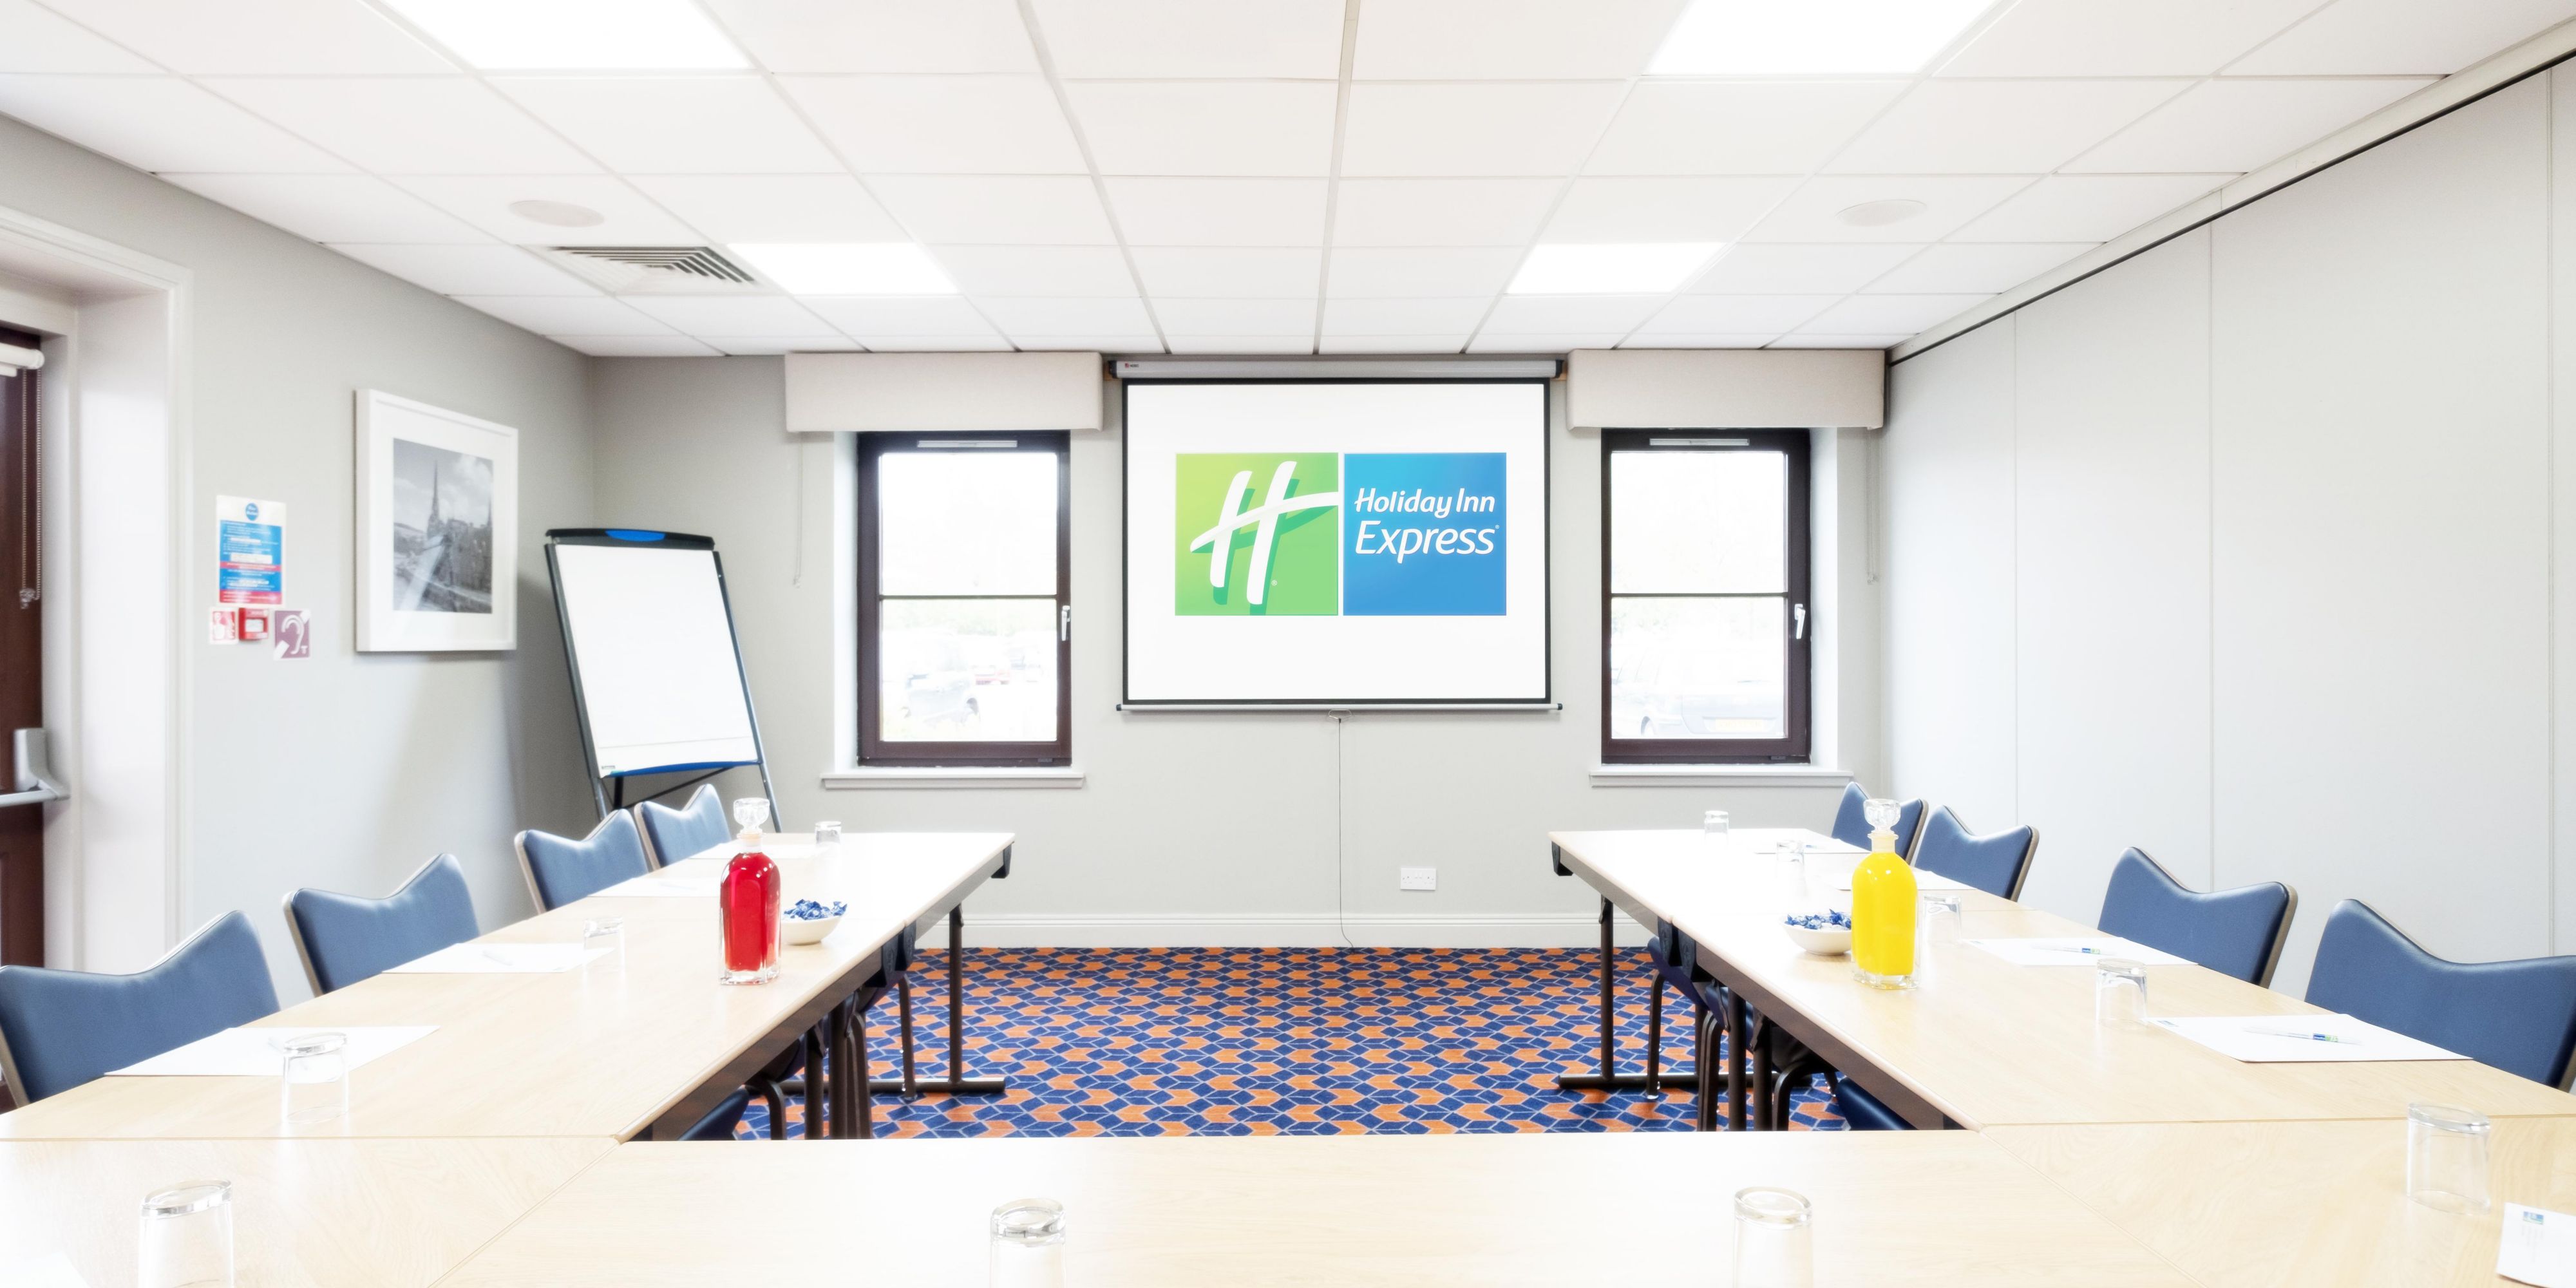 Host meetings or a conference for up to 40 people in the hotel’s two naturally lit, air-conditioned meeting rooms. AV equipment and free WiFi are available to bring your presentations to life. Free on-site parking is available for delegates.